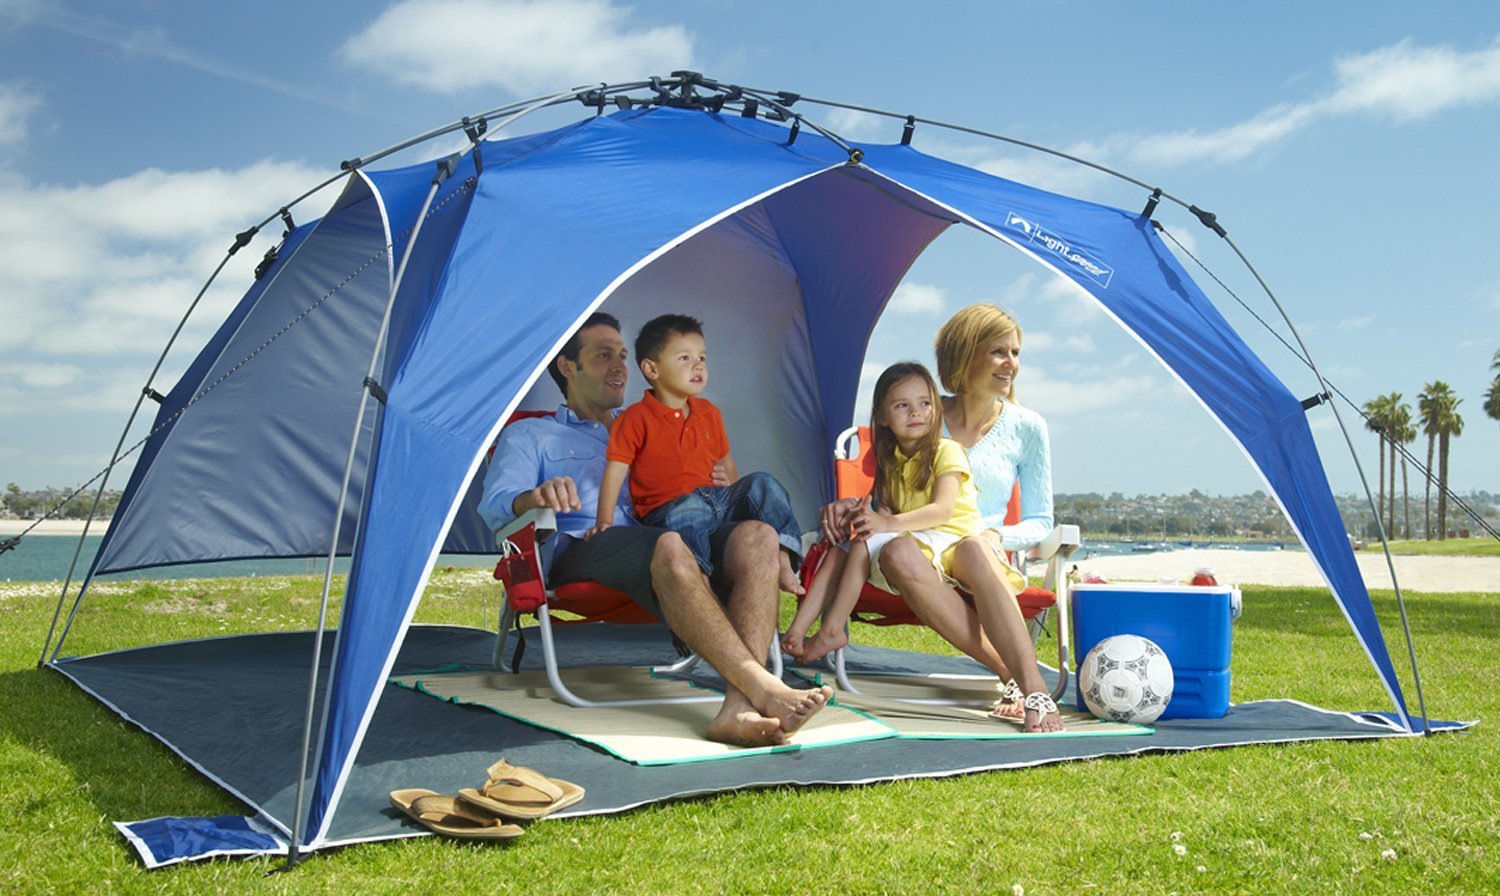 The Best Beach Umbrellas, Chairs Tents of 20- Your